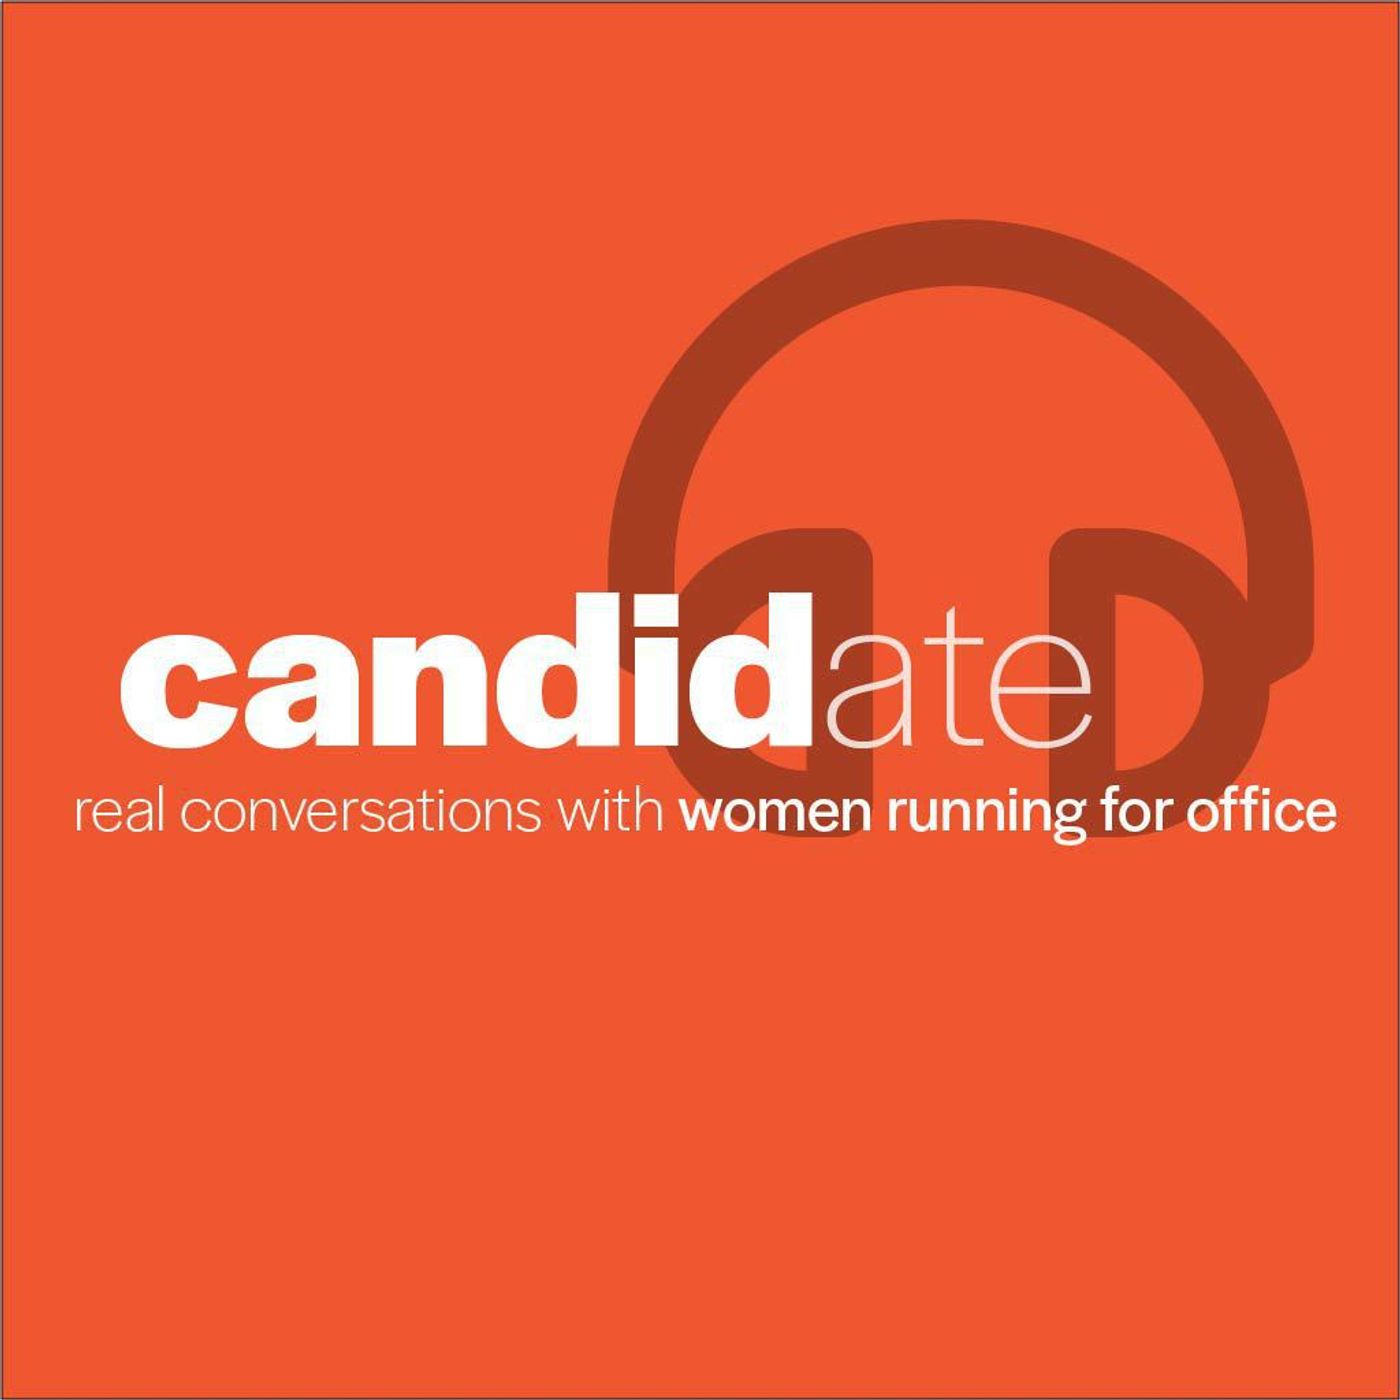 S2 Ep82: Candid(ate) Episode 5: We Really Do Care f/ Cindy Axne, Betsy Dirksen Londrigan & Dr. Kayser Enneking